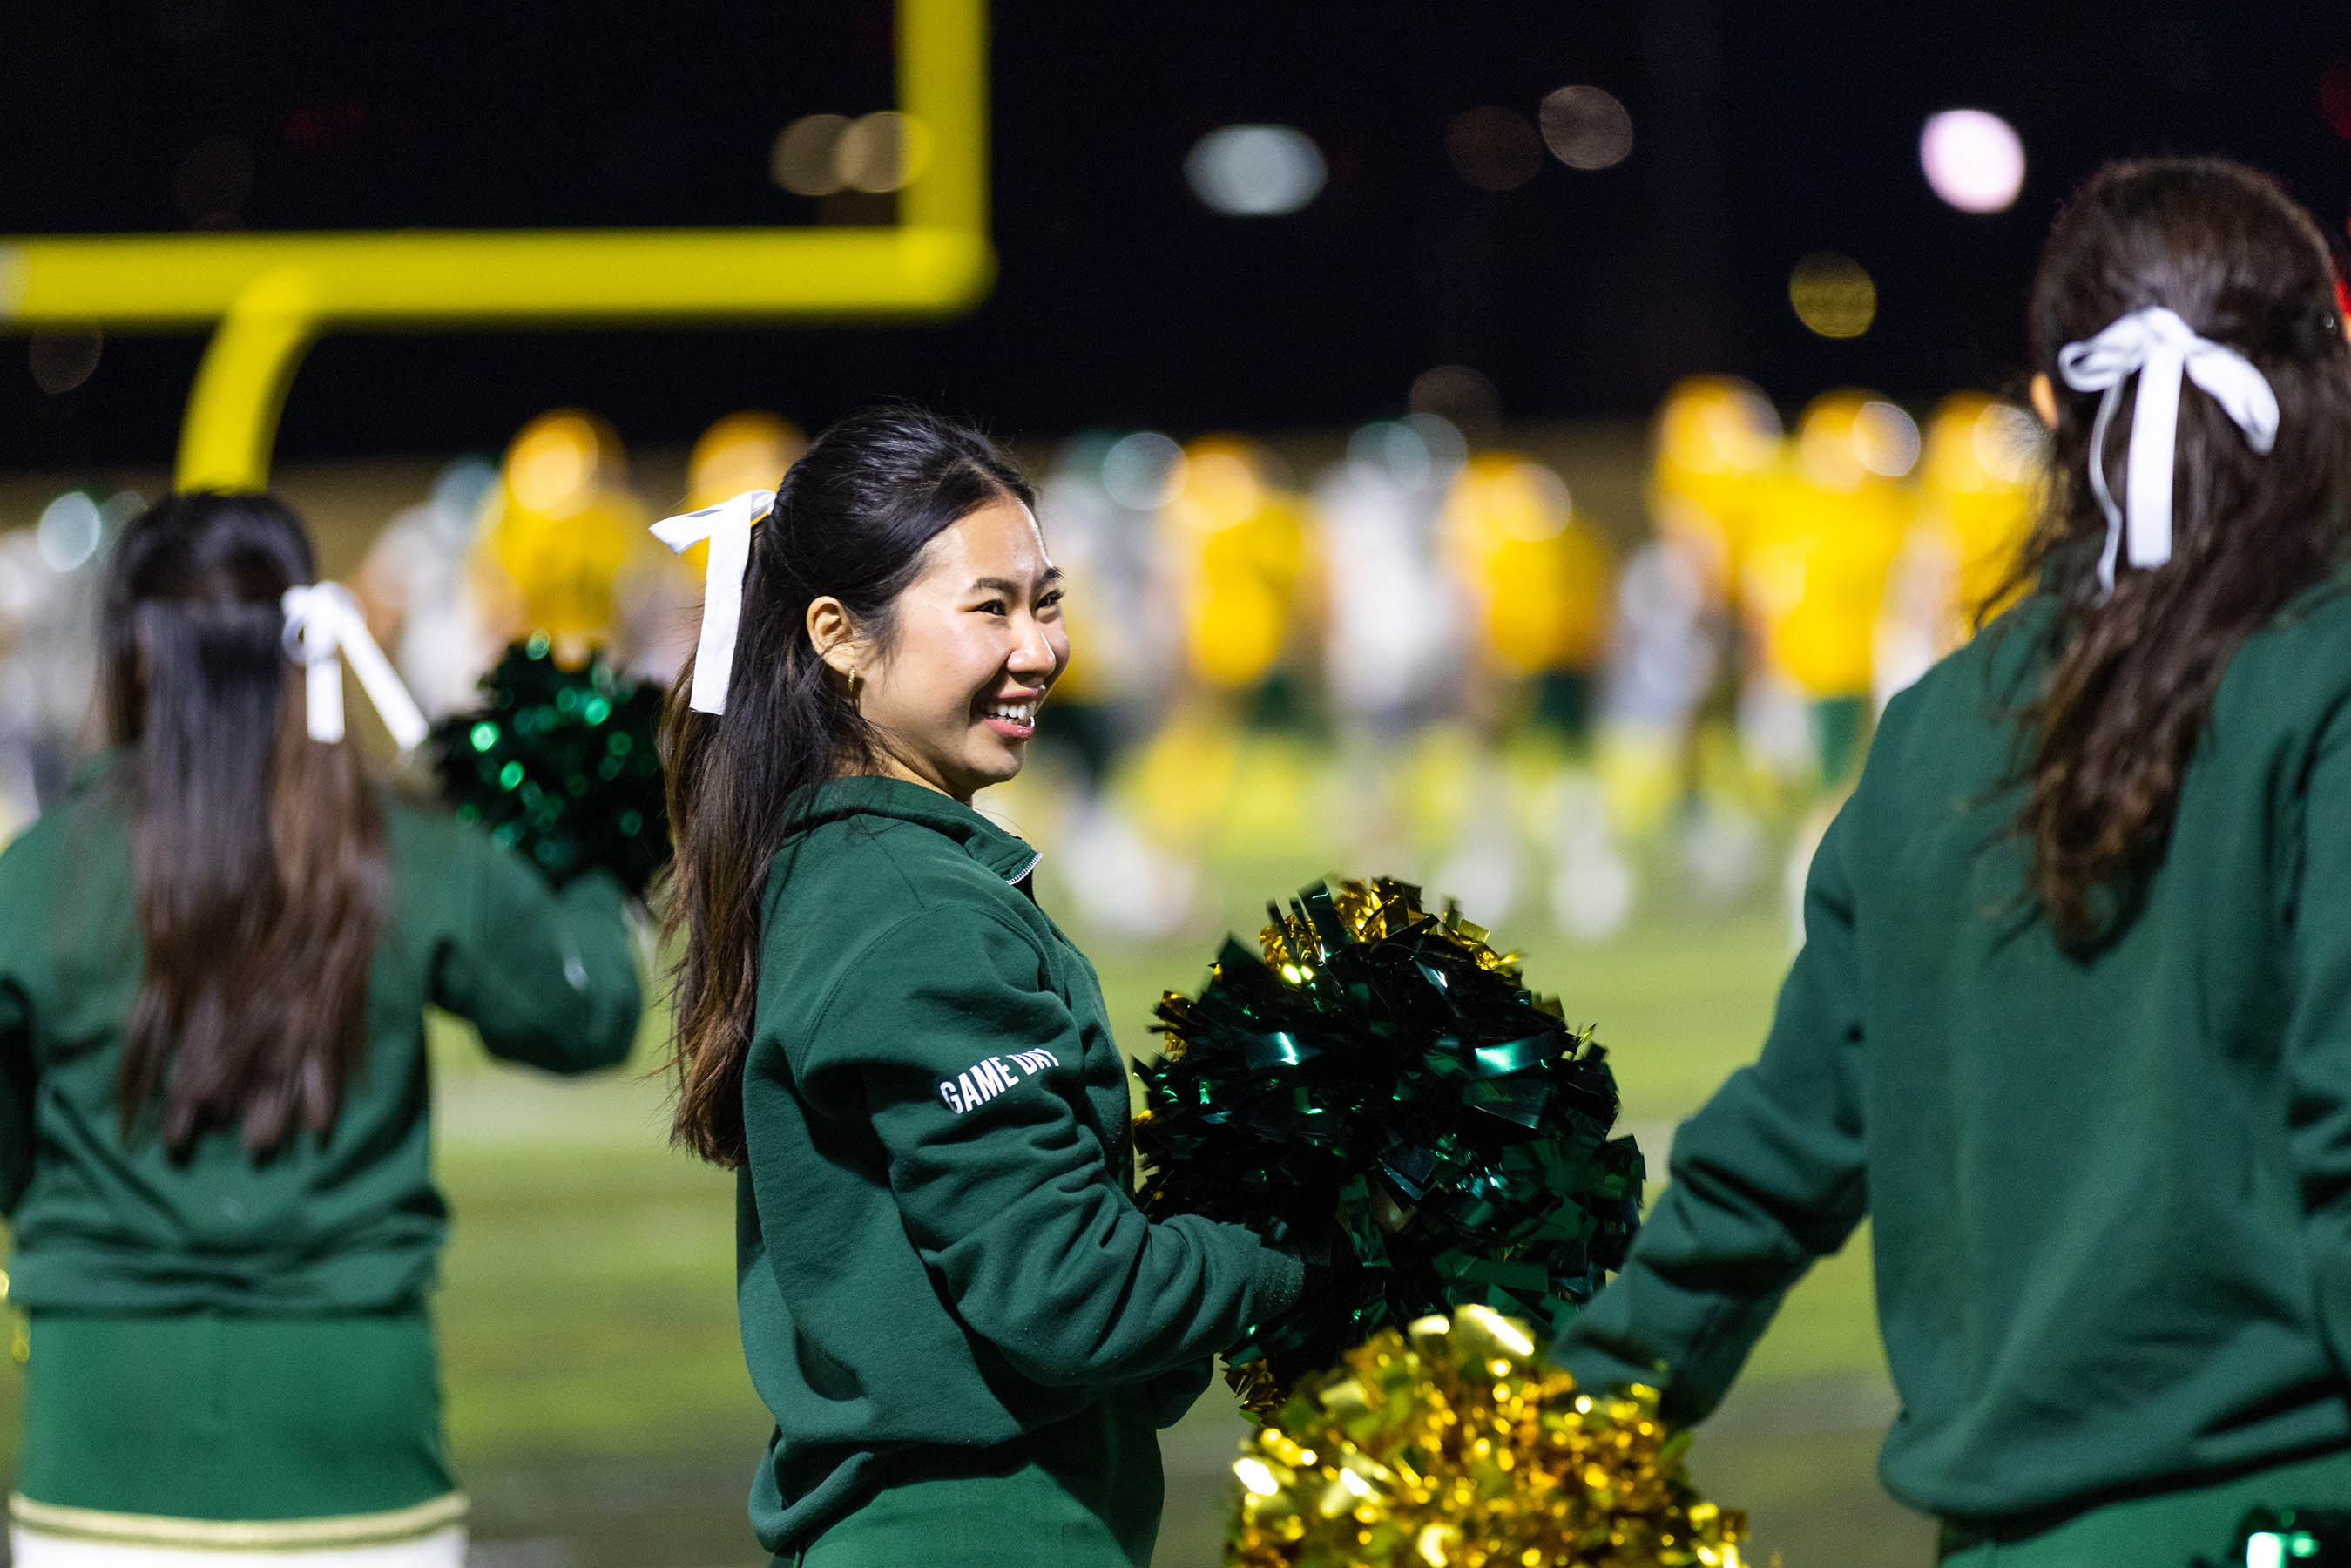 The University of Alberta Cheer team at the Golden Bears football game